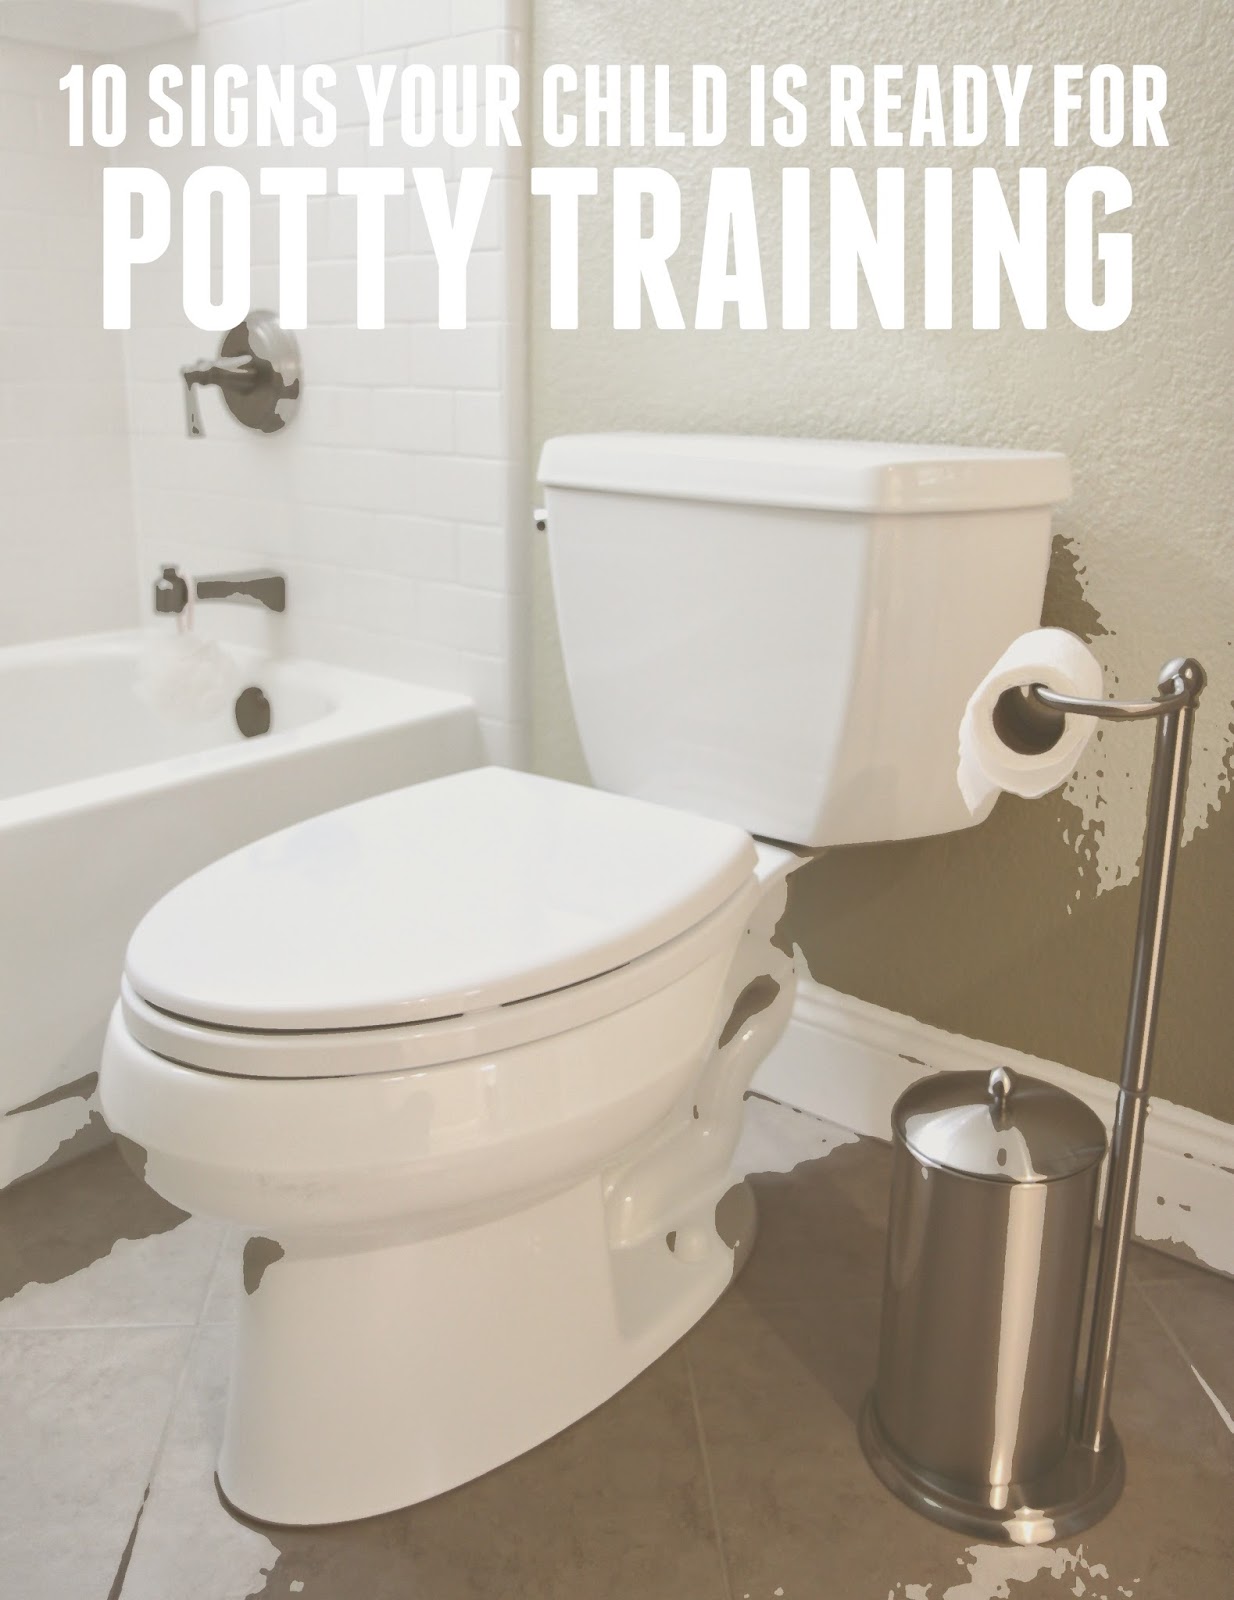 Toddler Approved! 10 Signs Your Child is Ready for Potty Training